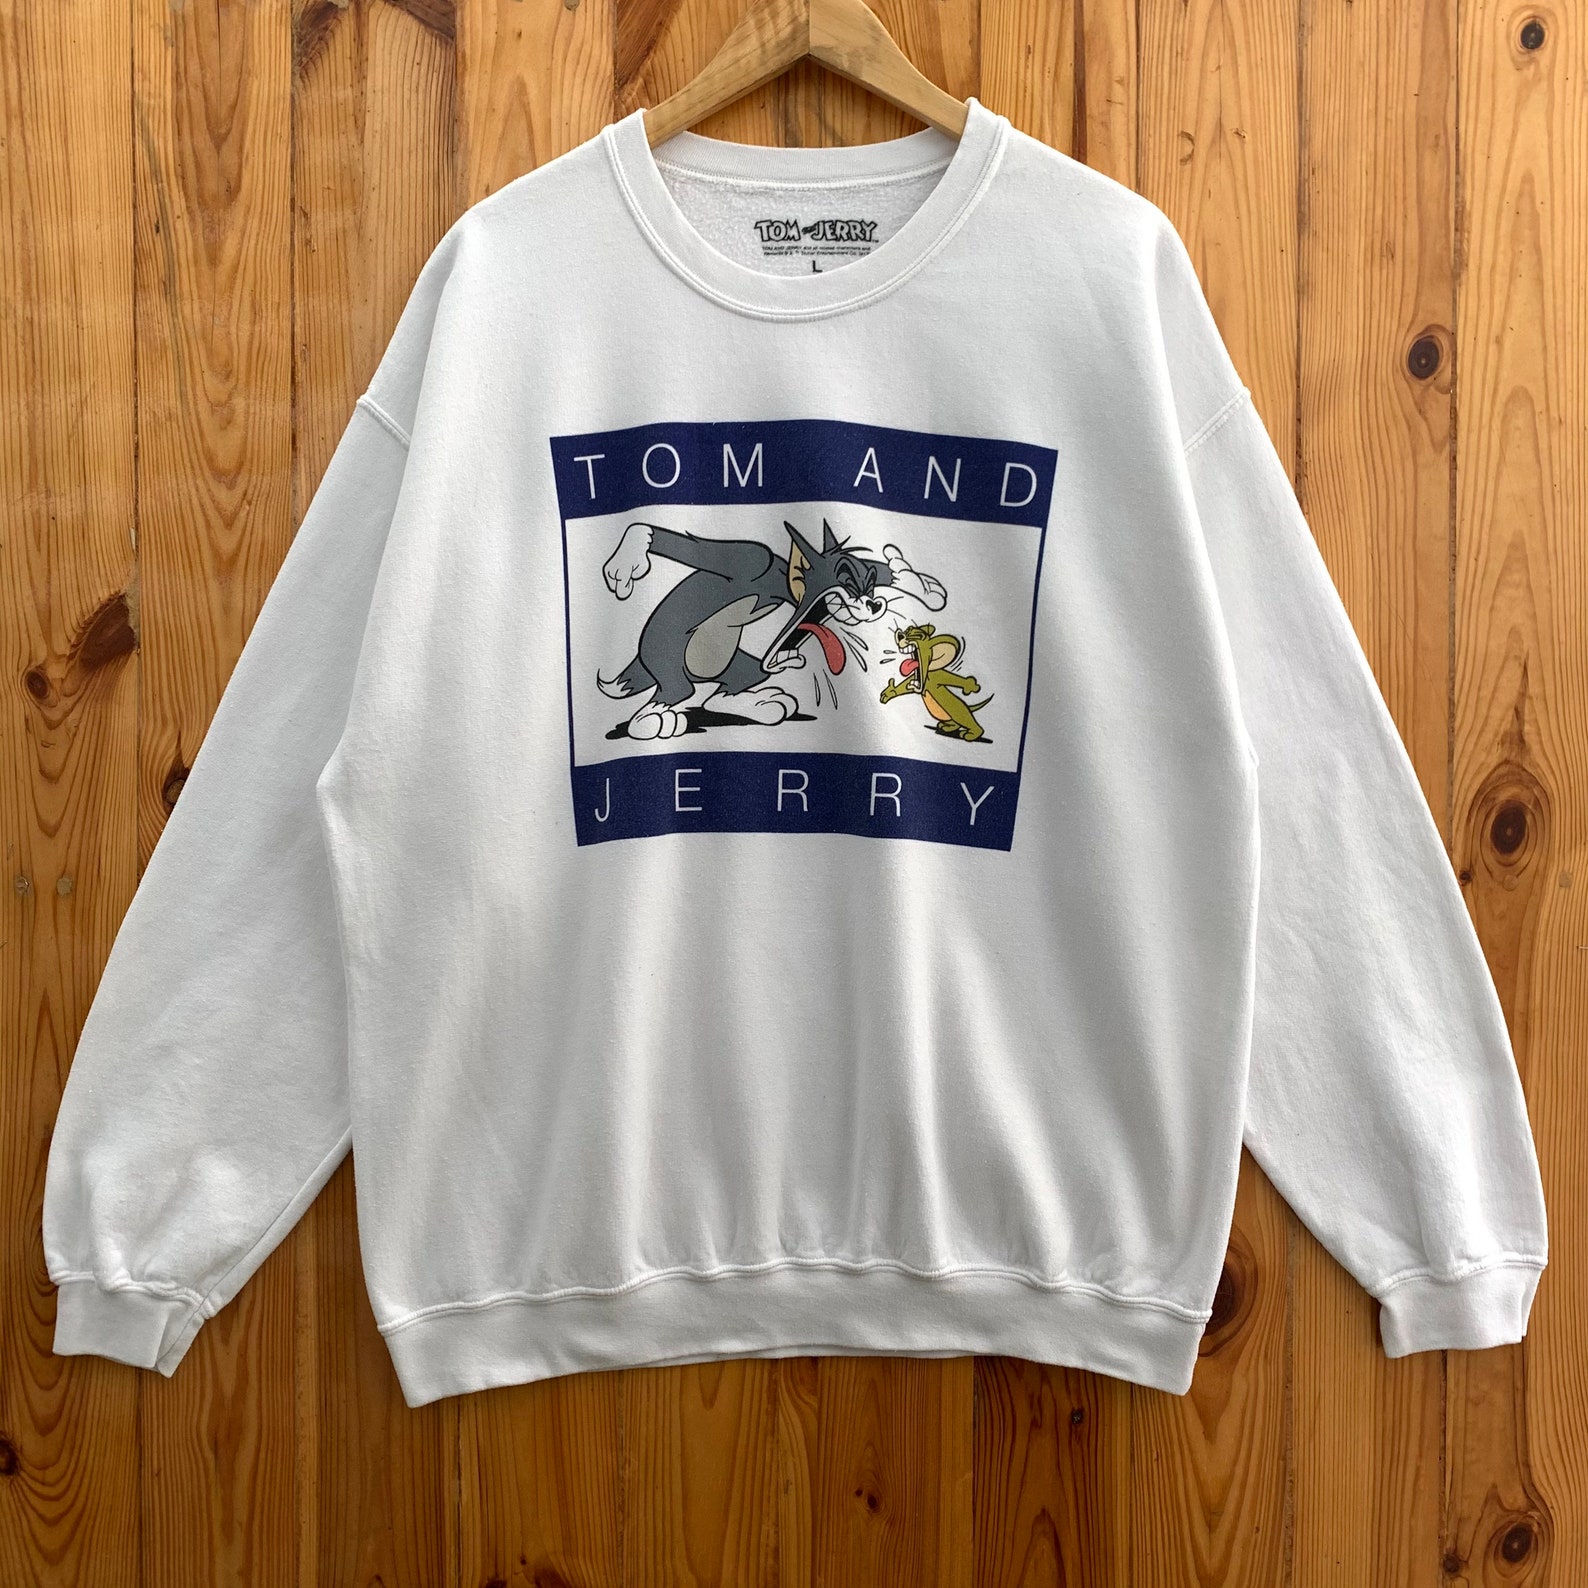 Tom and jerry sweatshirt crewneck pullover parody Tommy | Etsy